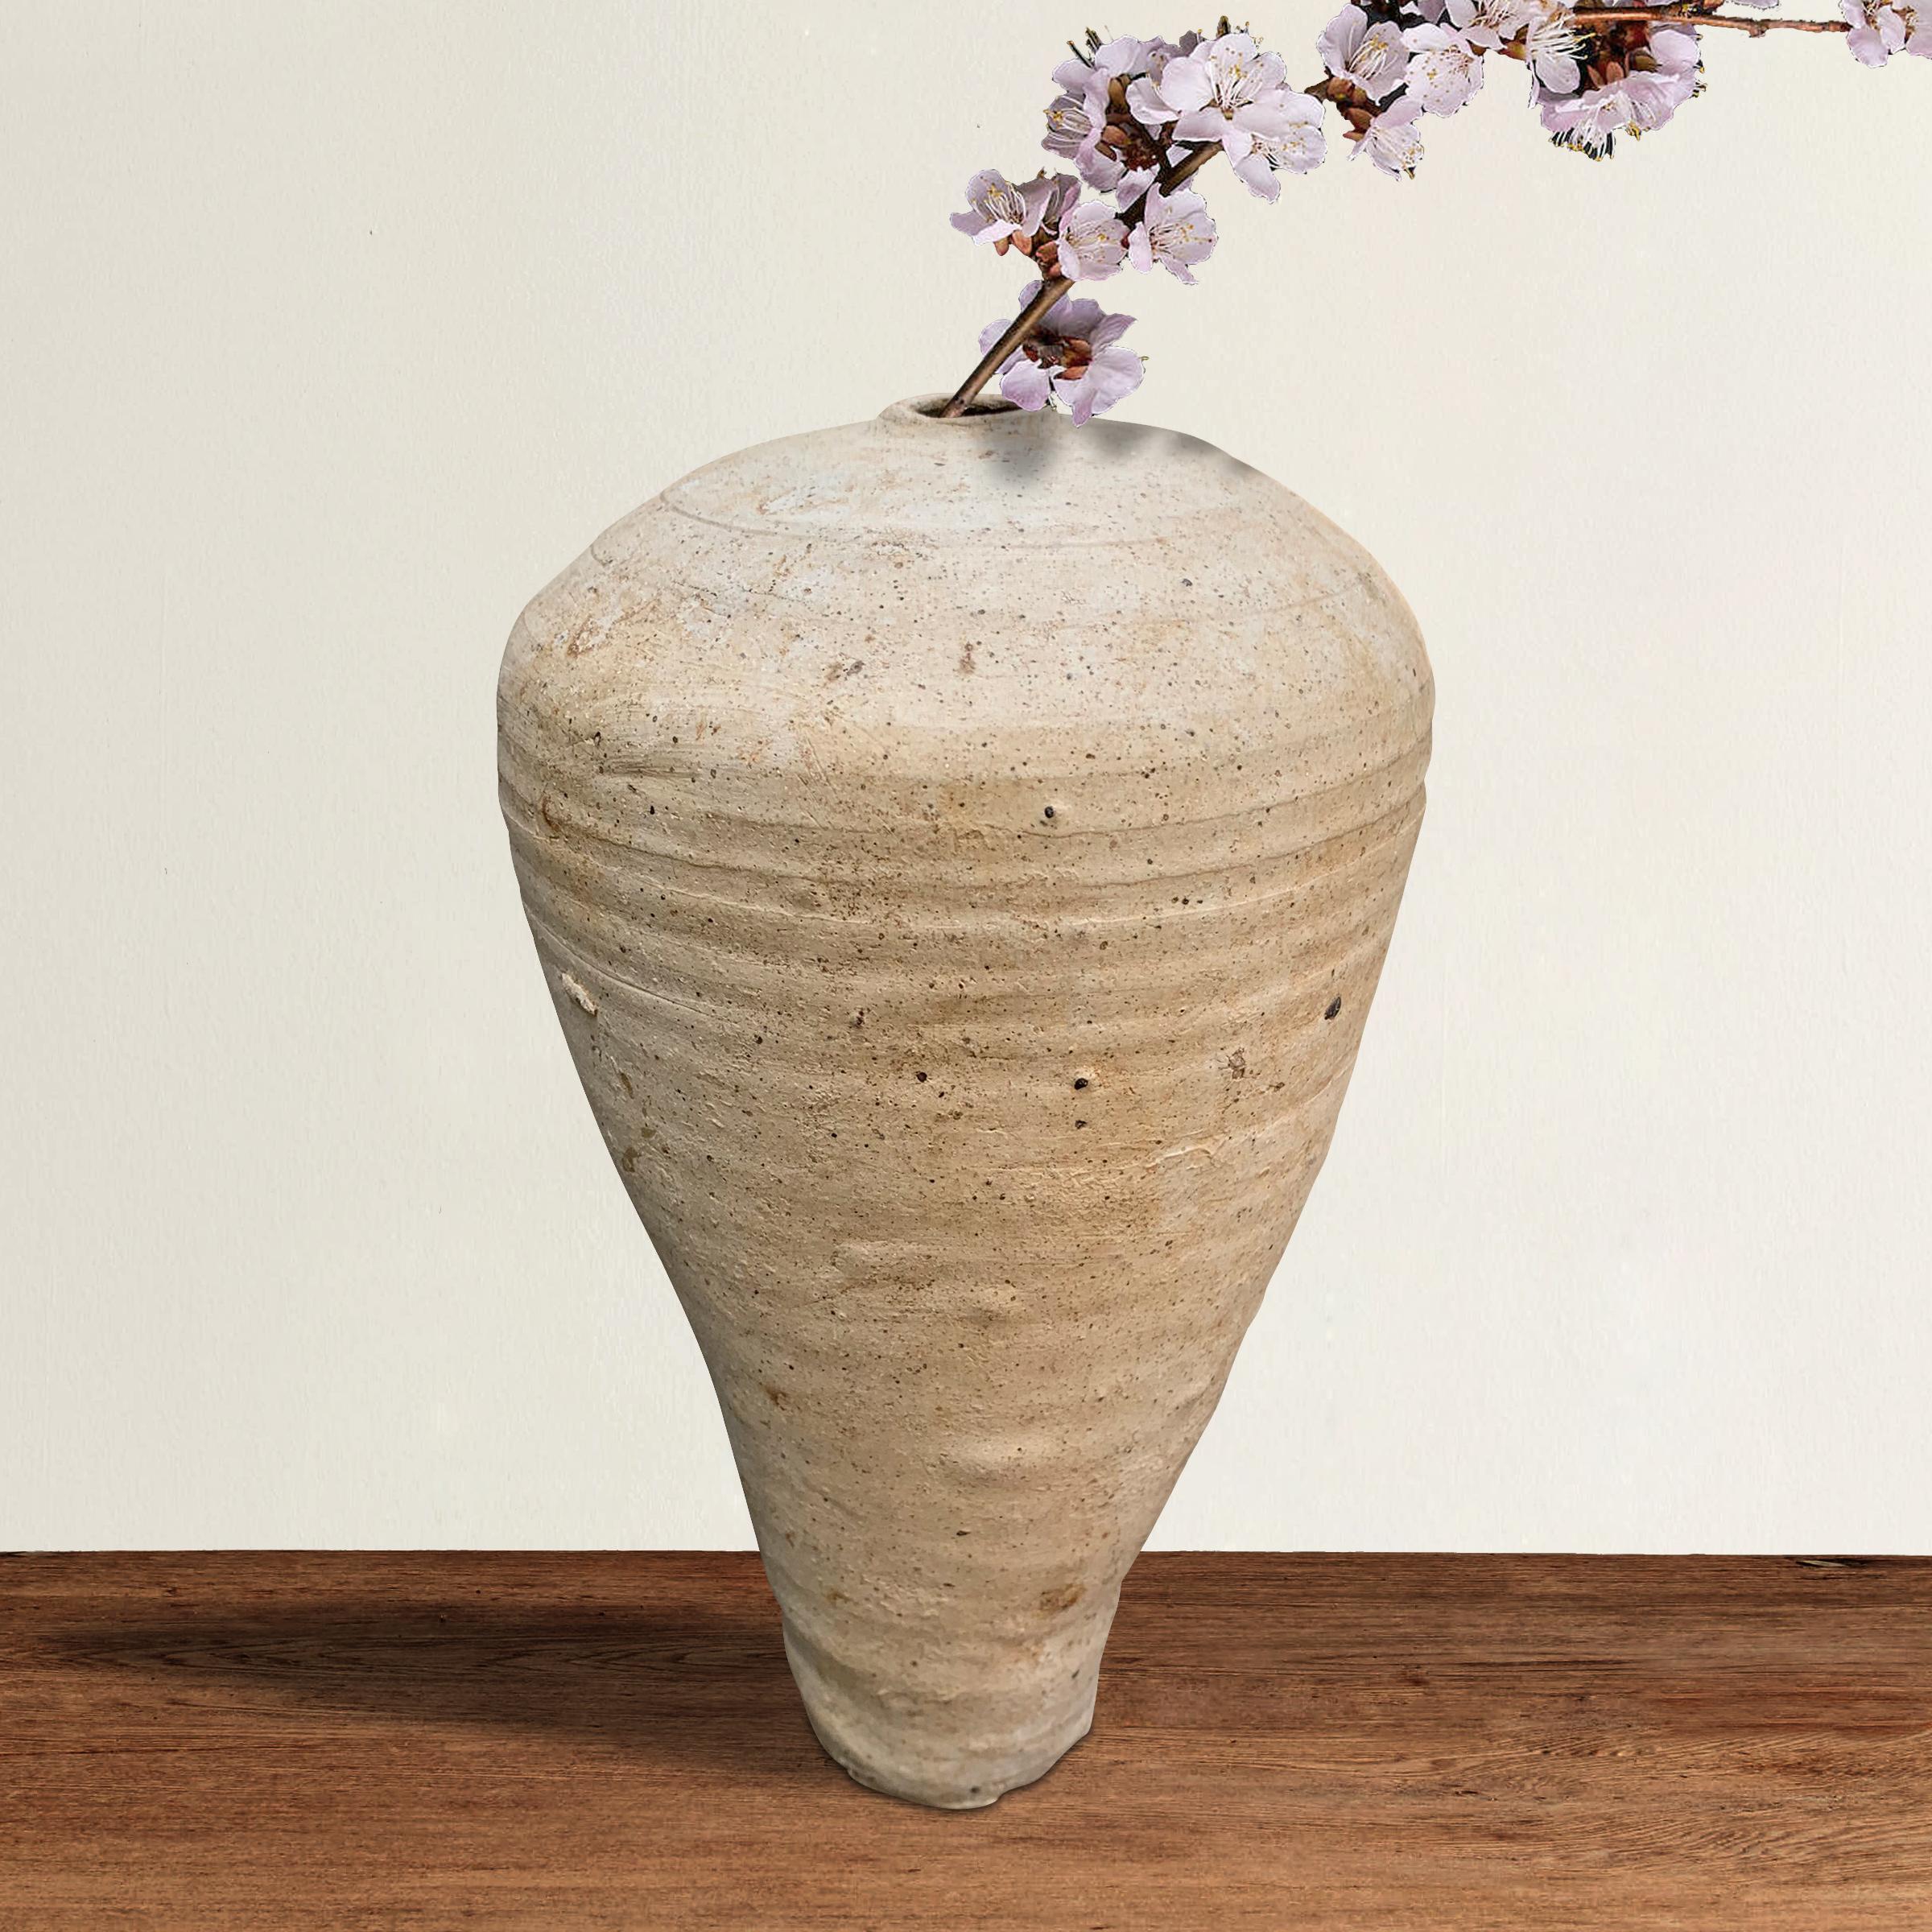 An incredible Chinese Song Dynasty (960 to 1279 AD) hand-thrown ceramic meiping vase of wabi-sabi form with dimples and a perfectly imperfect lean. Meiping vases were designed with the ideal feminine form in mind with a small mouth, large bosom,